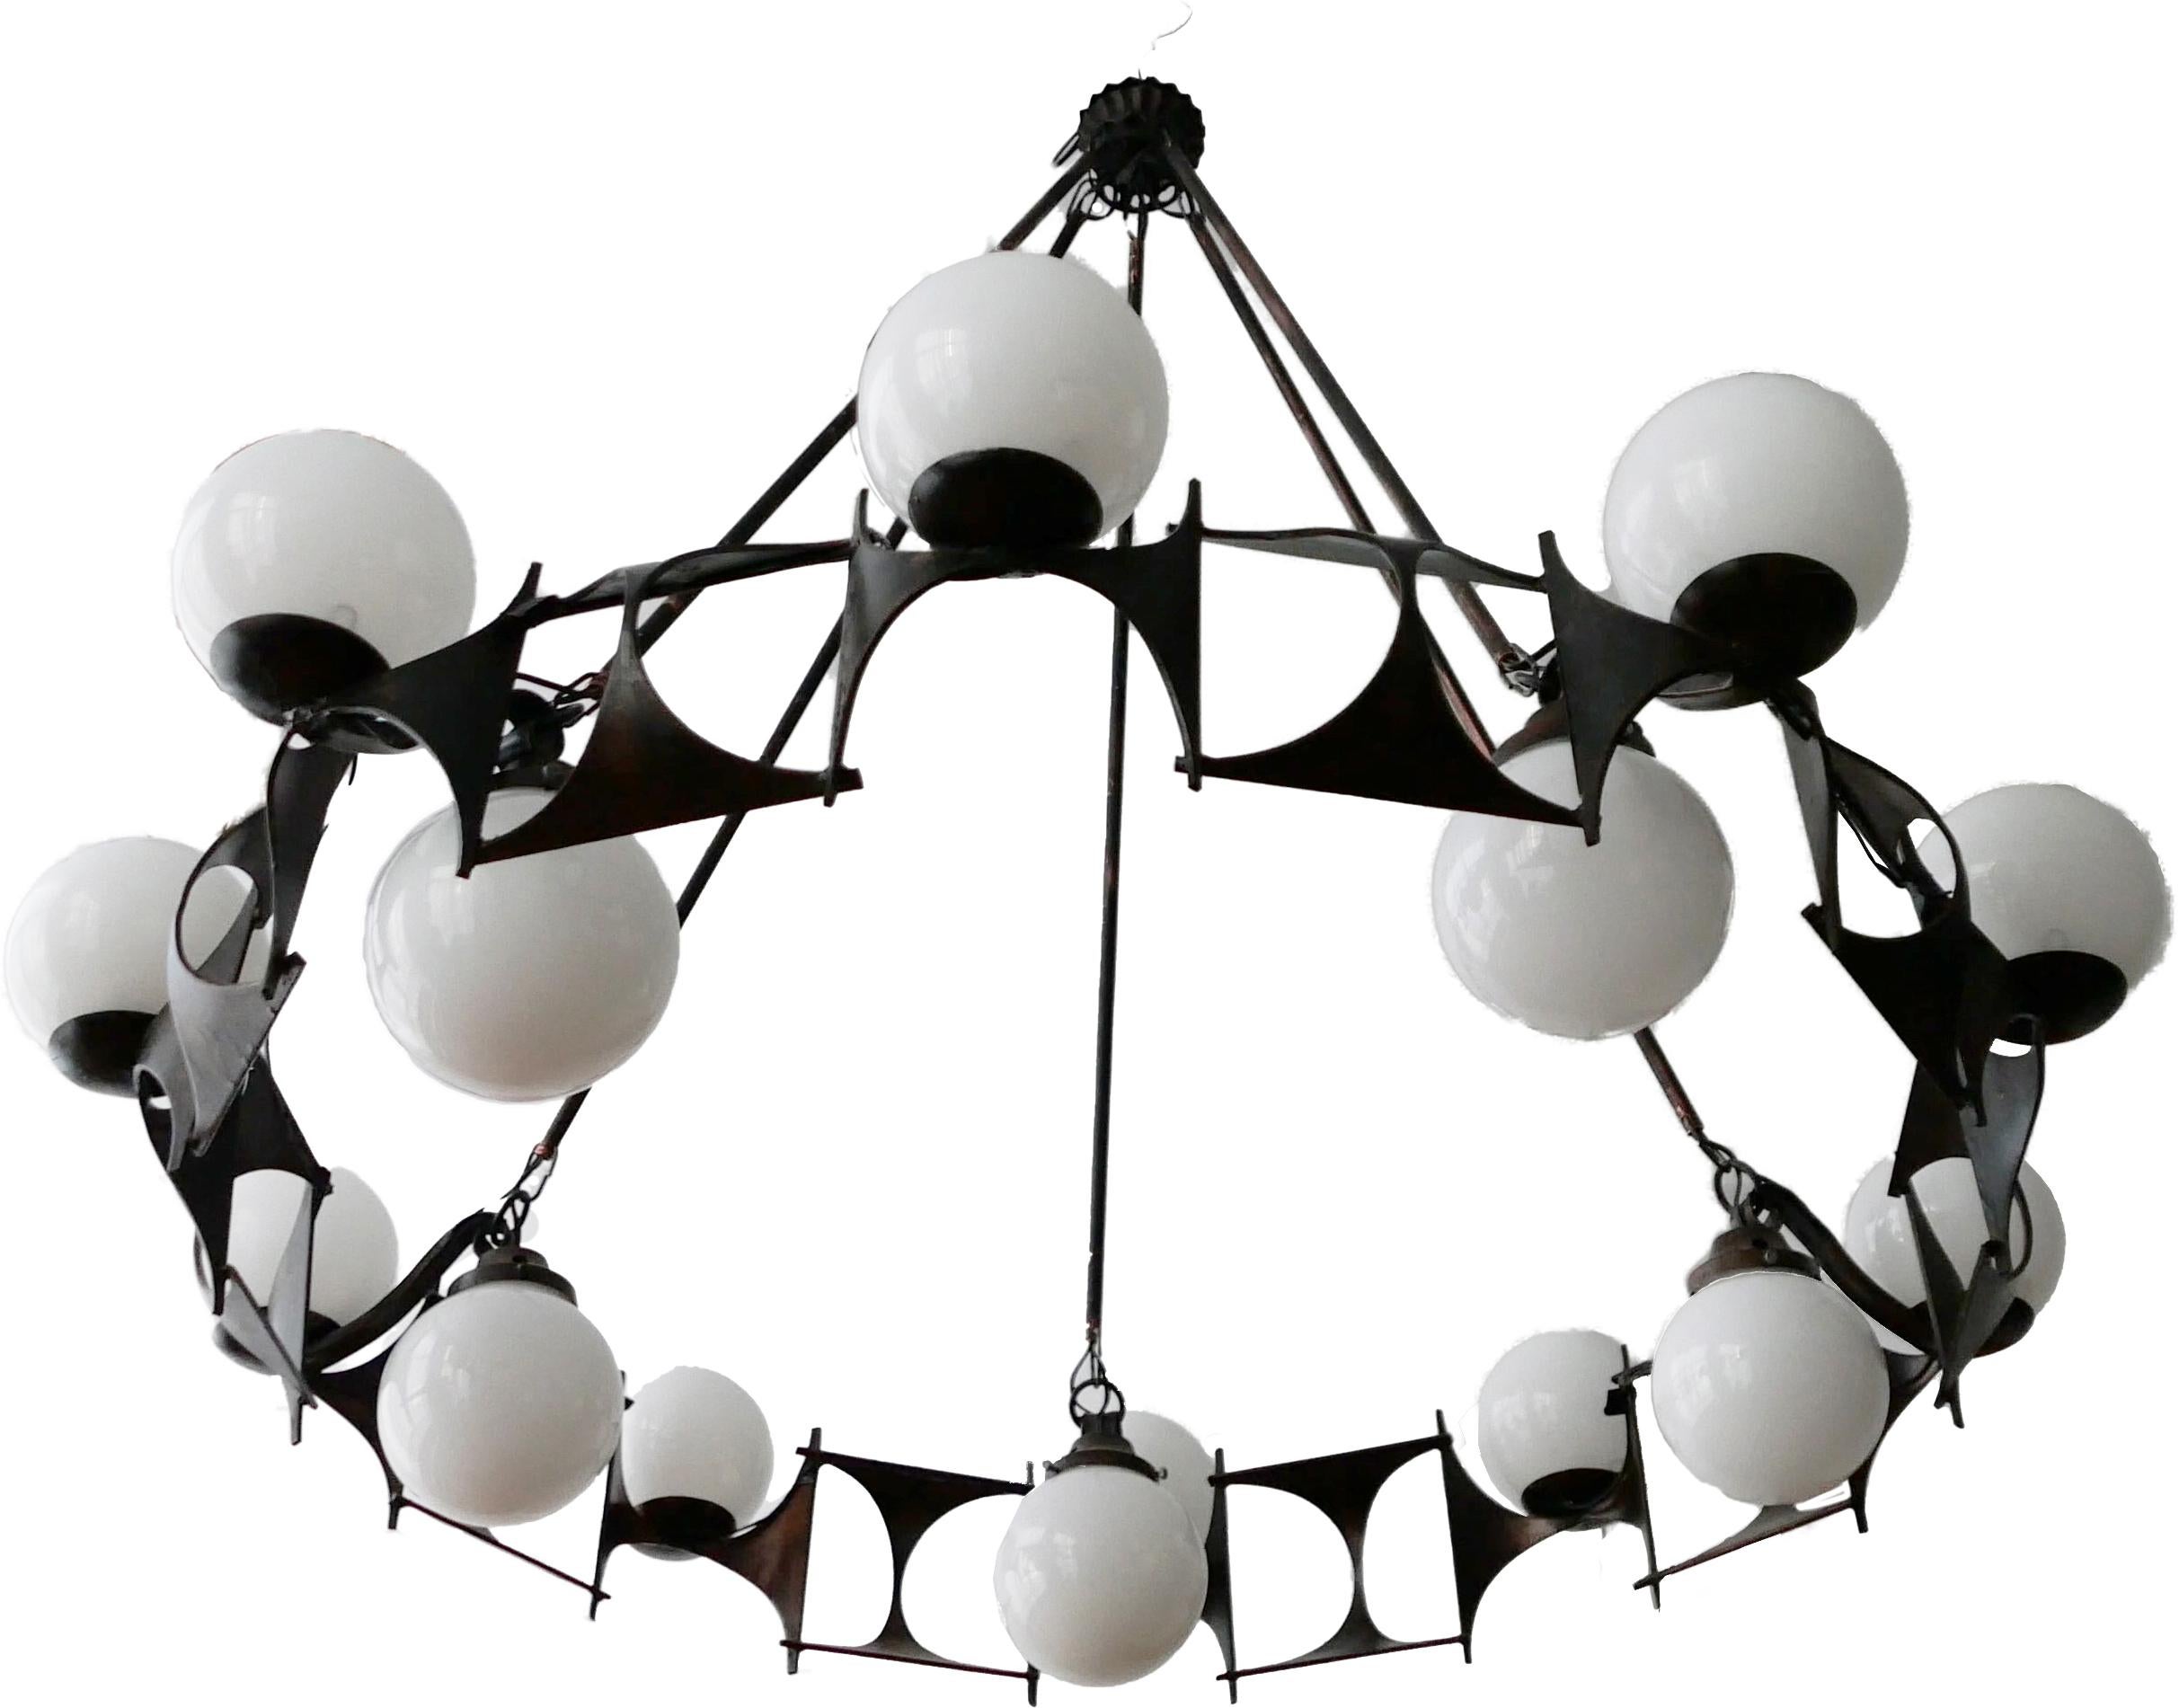 European Brutalist Style Chandelier Lamp from the 1950s For Sale